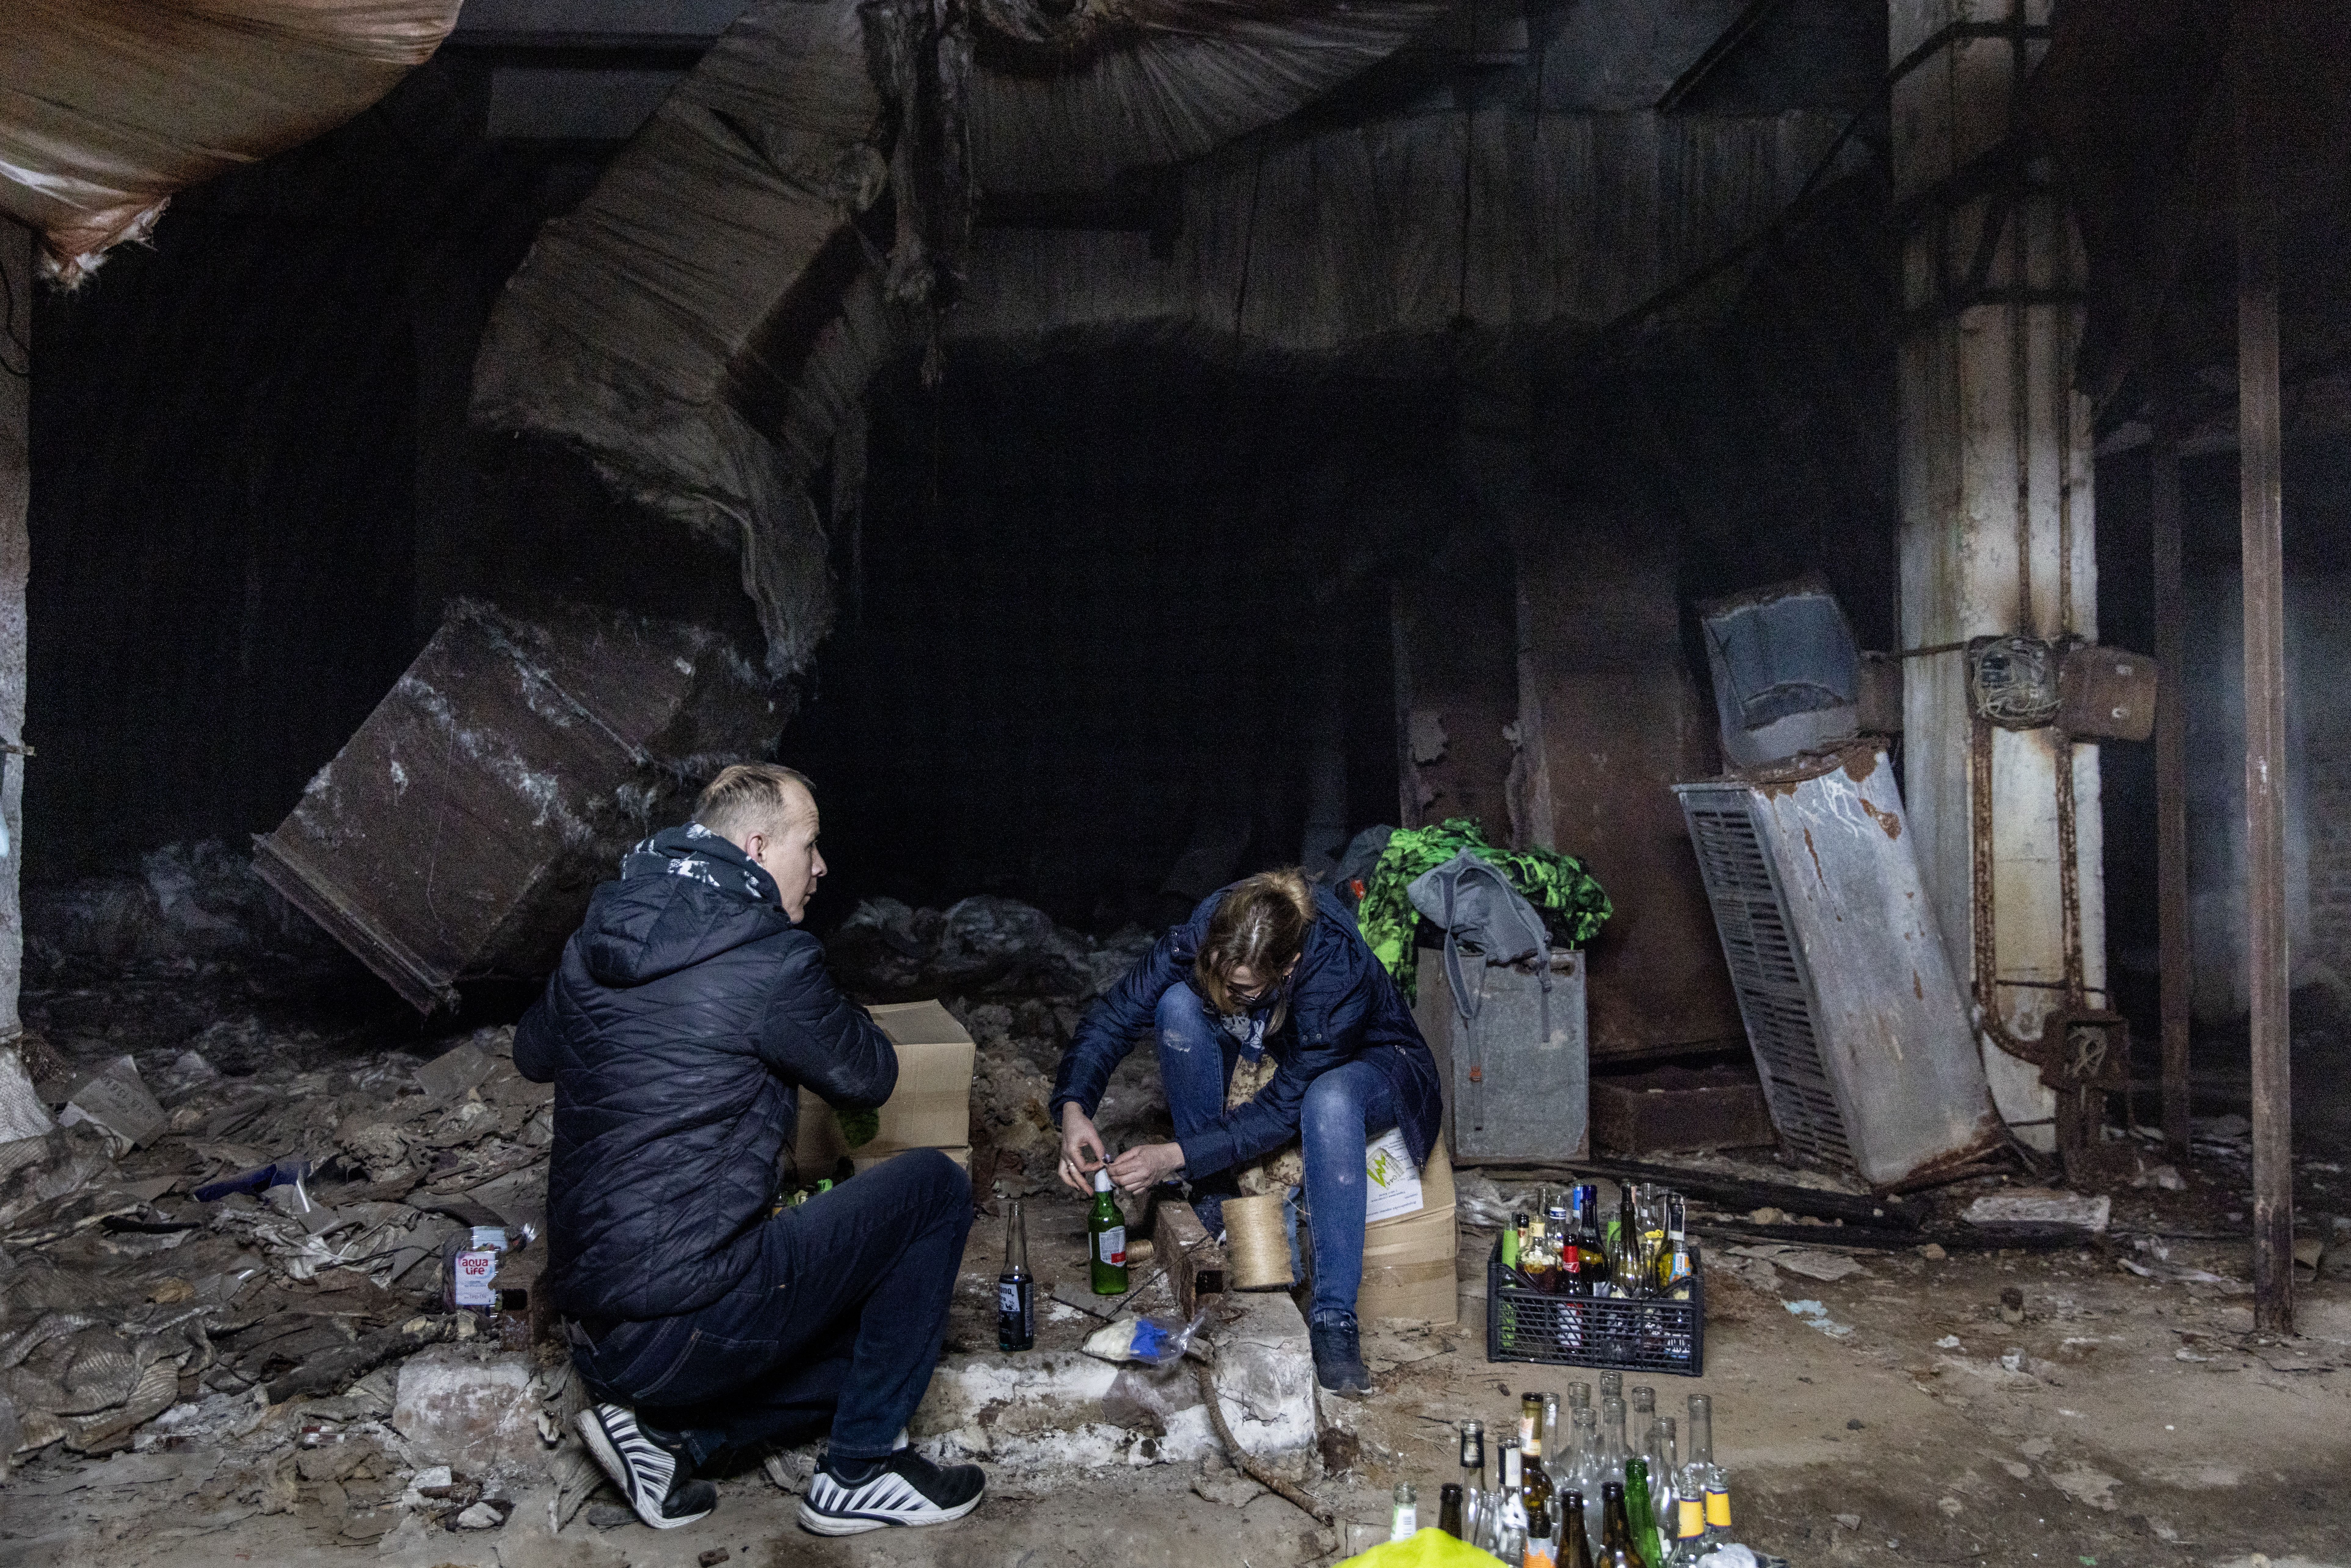 Volunteers work to make molotov cocktails in the basement of a bomb shelter on February 26, 2022 in Kyiv.